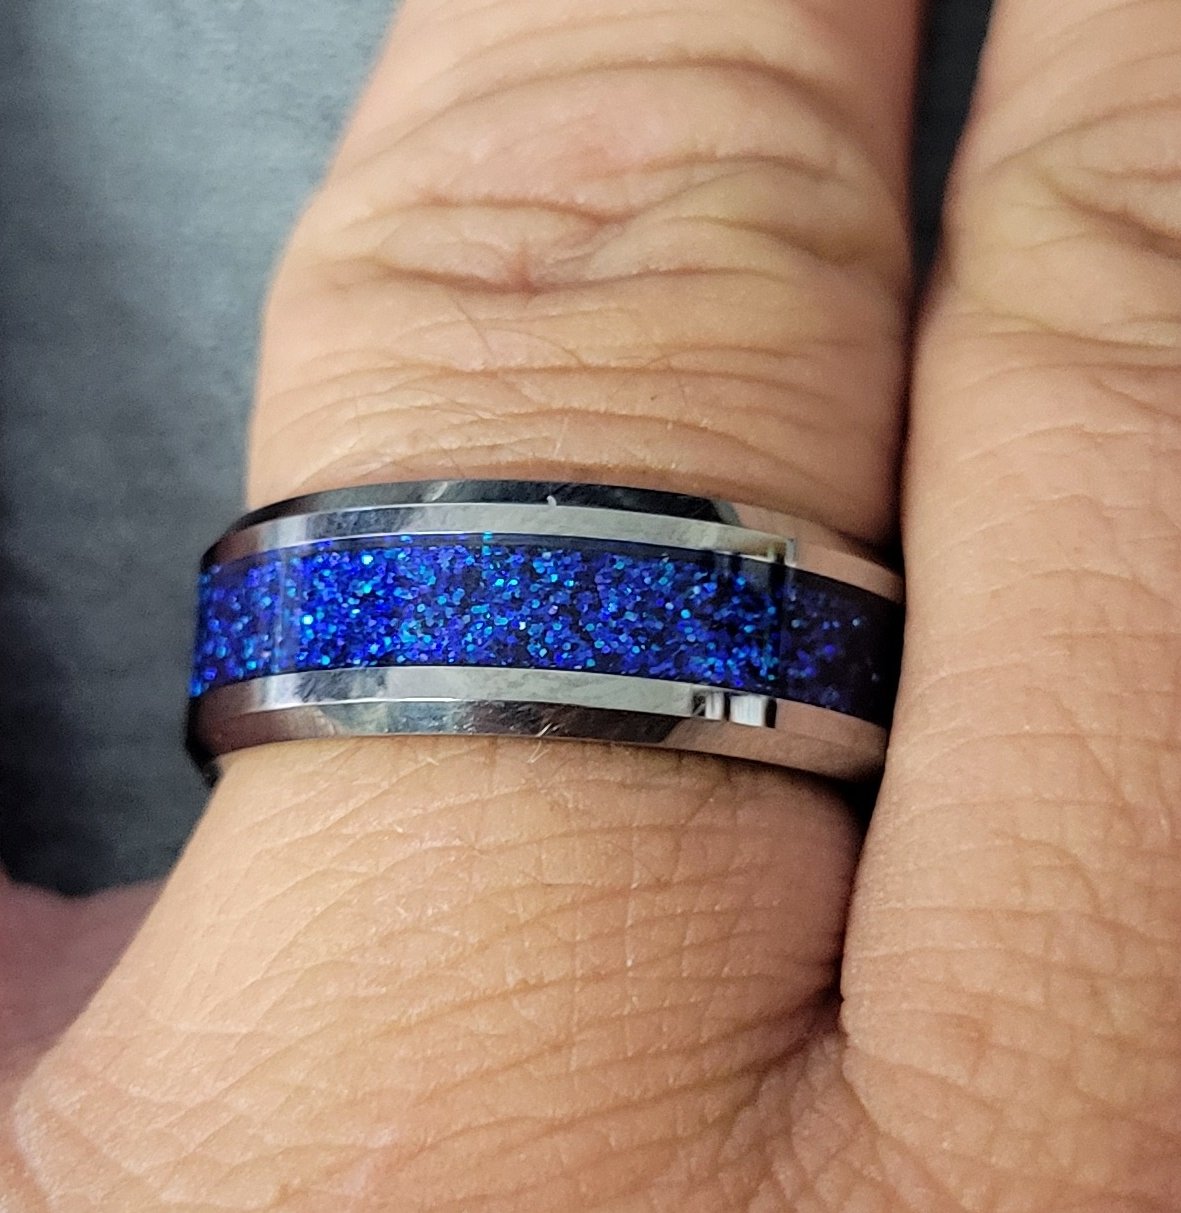 ThinkEngraved wedding Band Personalized Women's Wedding Band - Blue Galaxy Fire Opal Real Tungsten